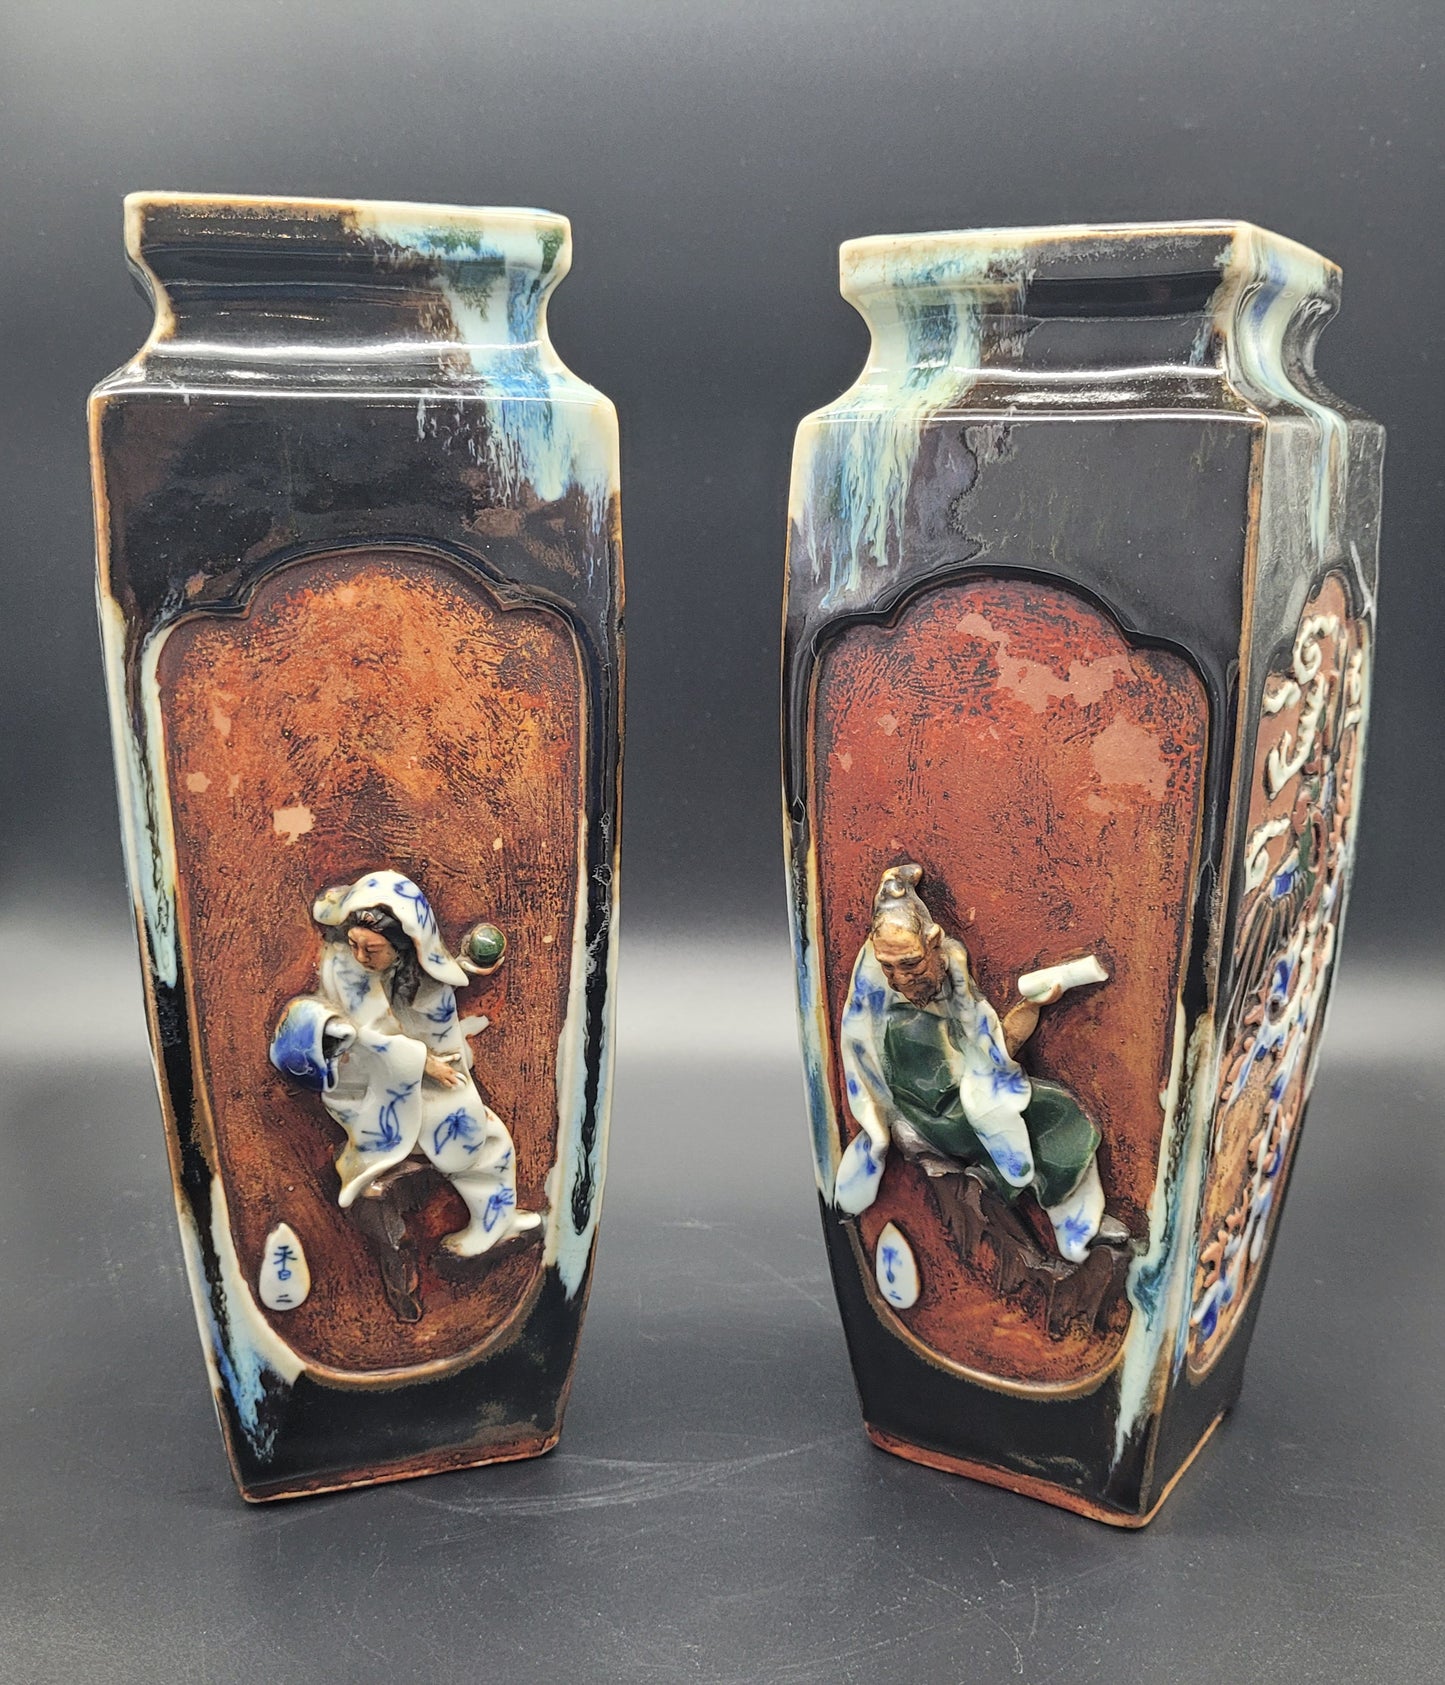 Highly Detailed Japanese Meiji Sumida Gawa Pottery Vases Signed By The Artist   Late 19th Century Meiji period  ANTIQUES USA